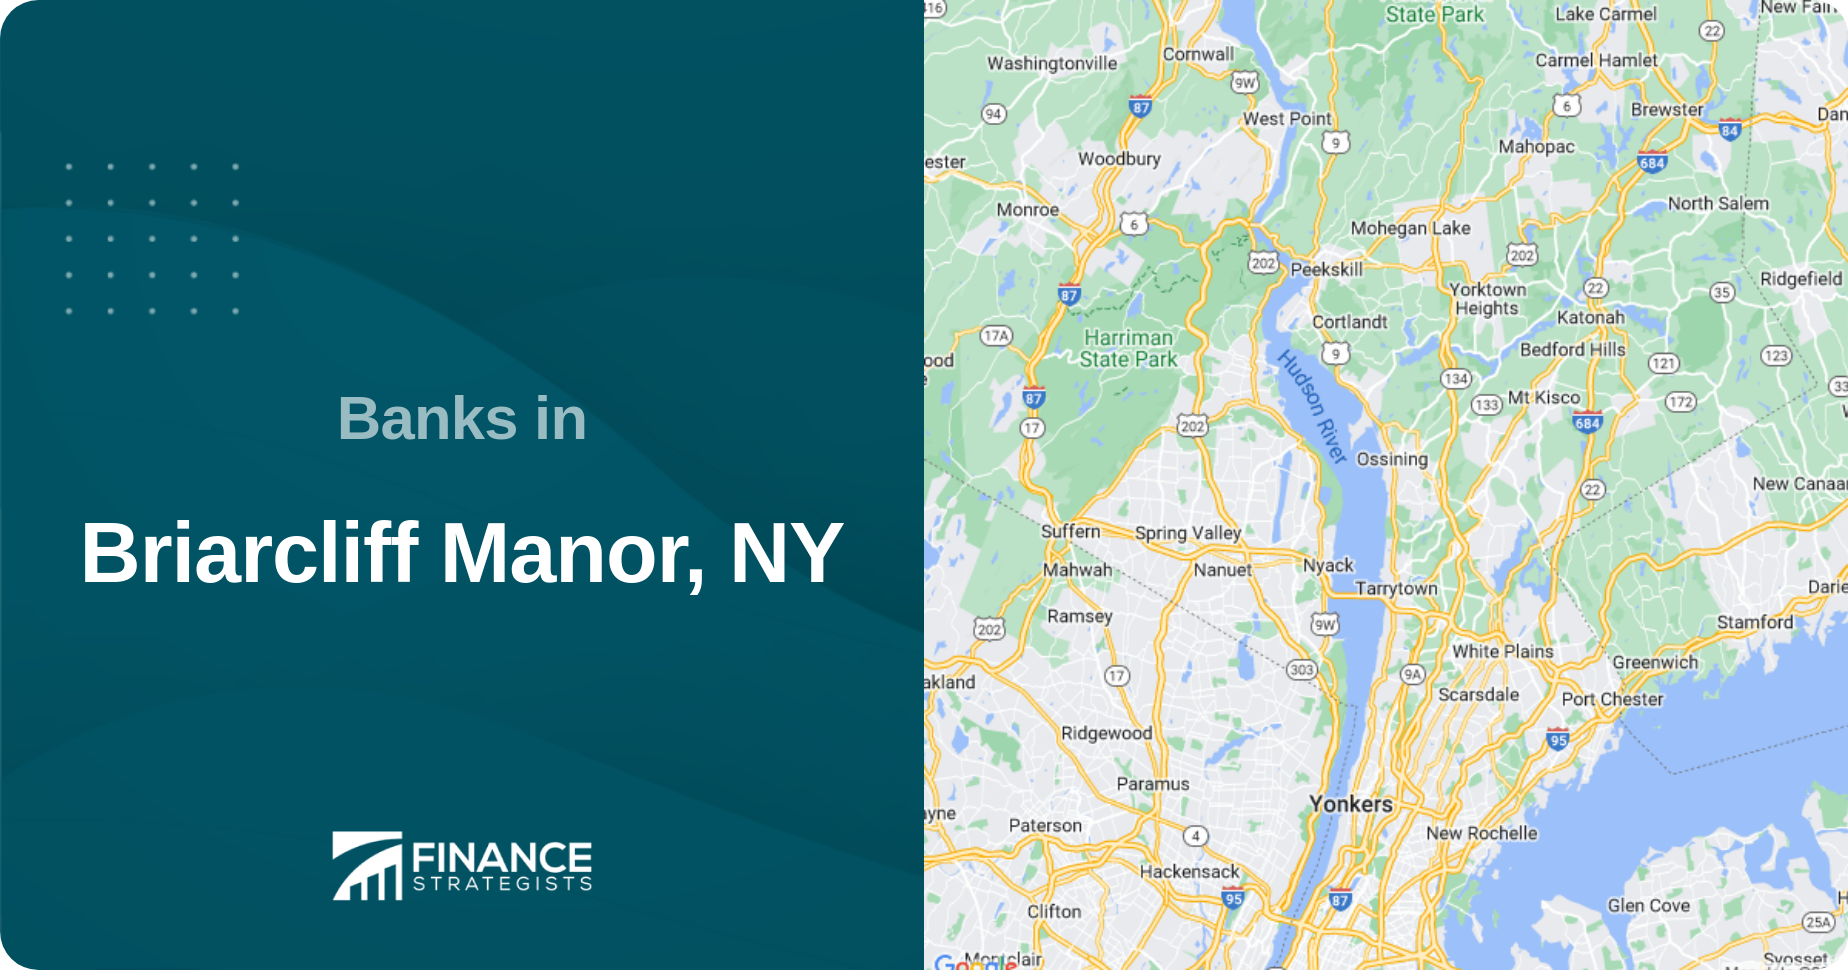 Banks in Briarcliff Manor, NY